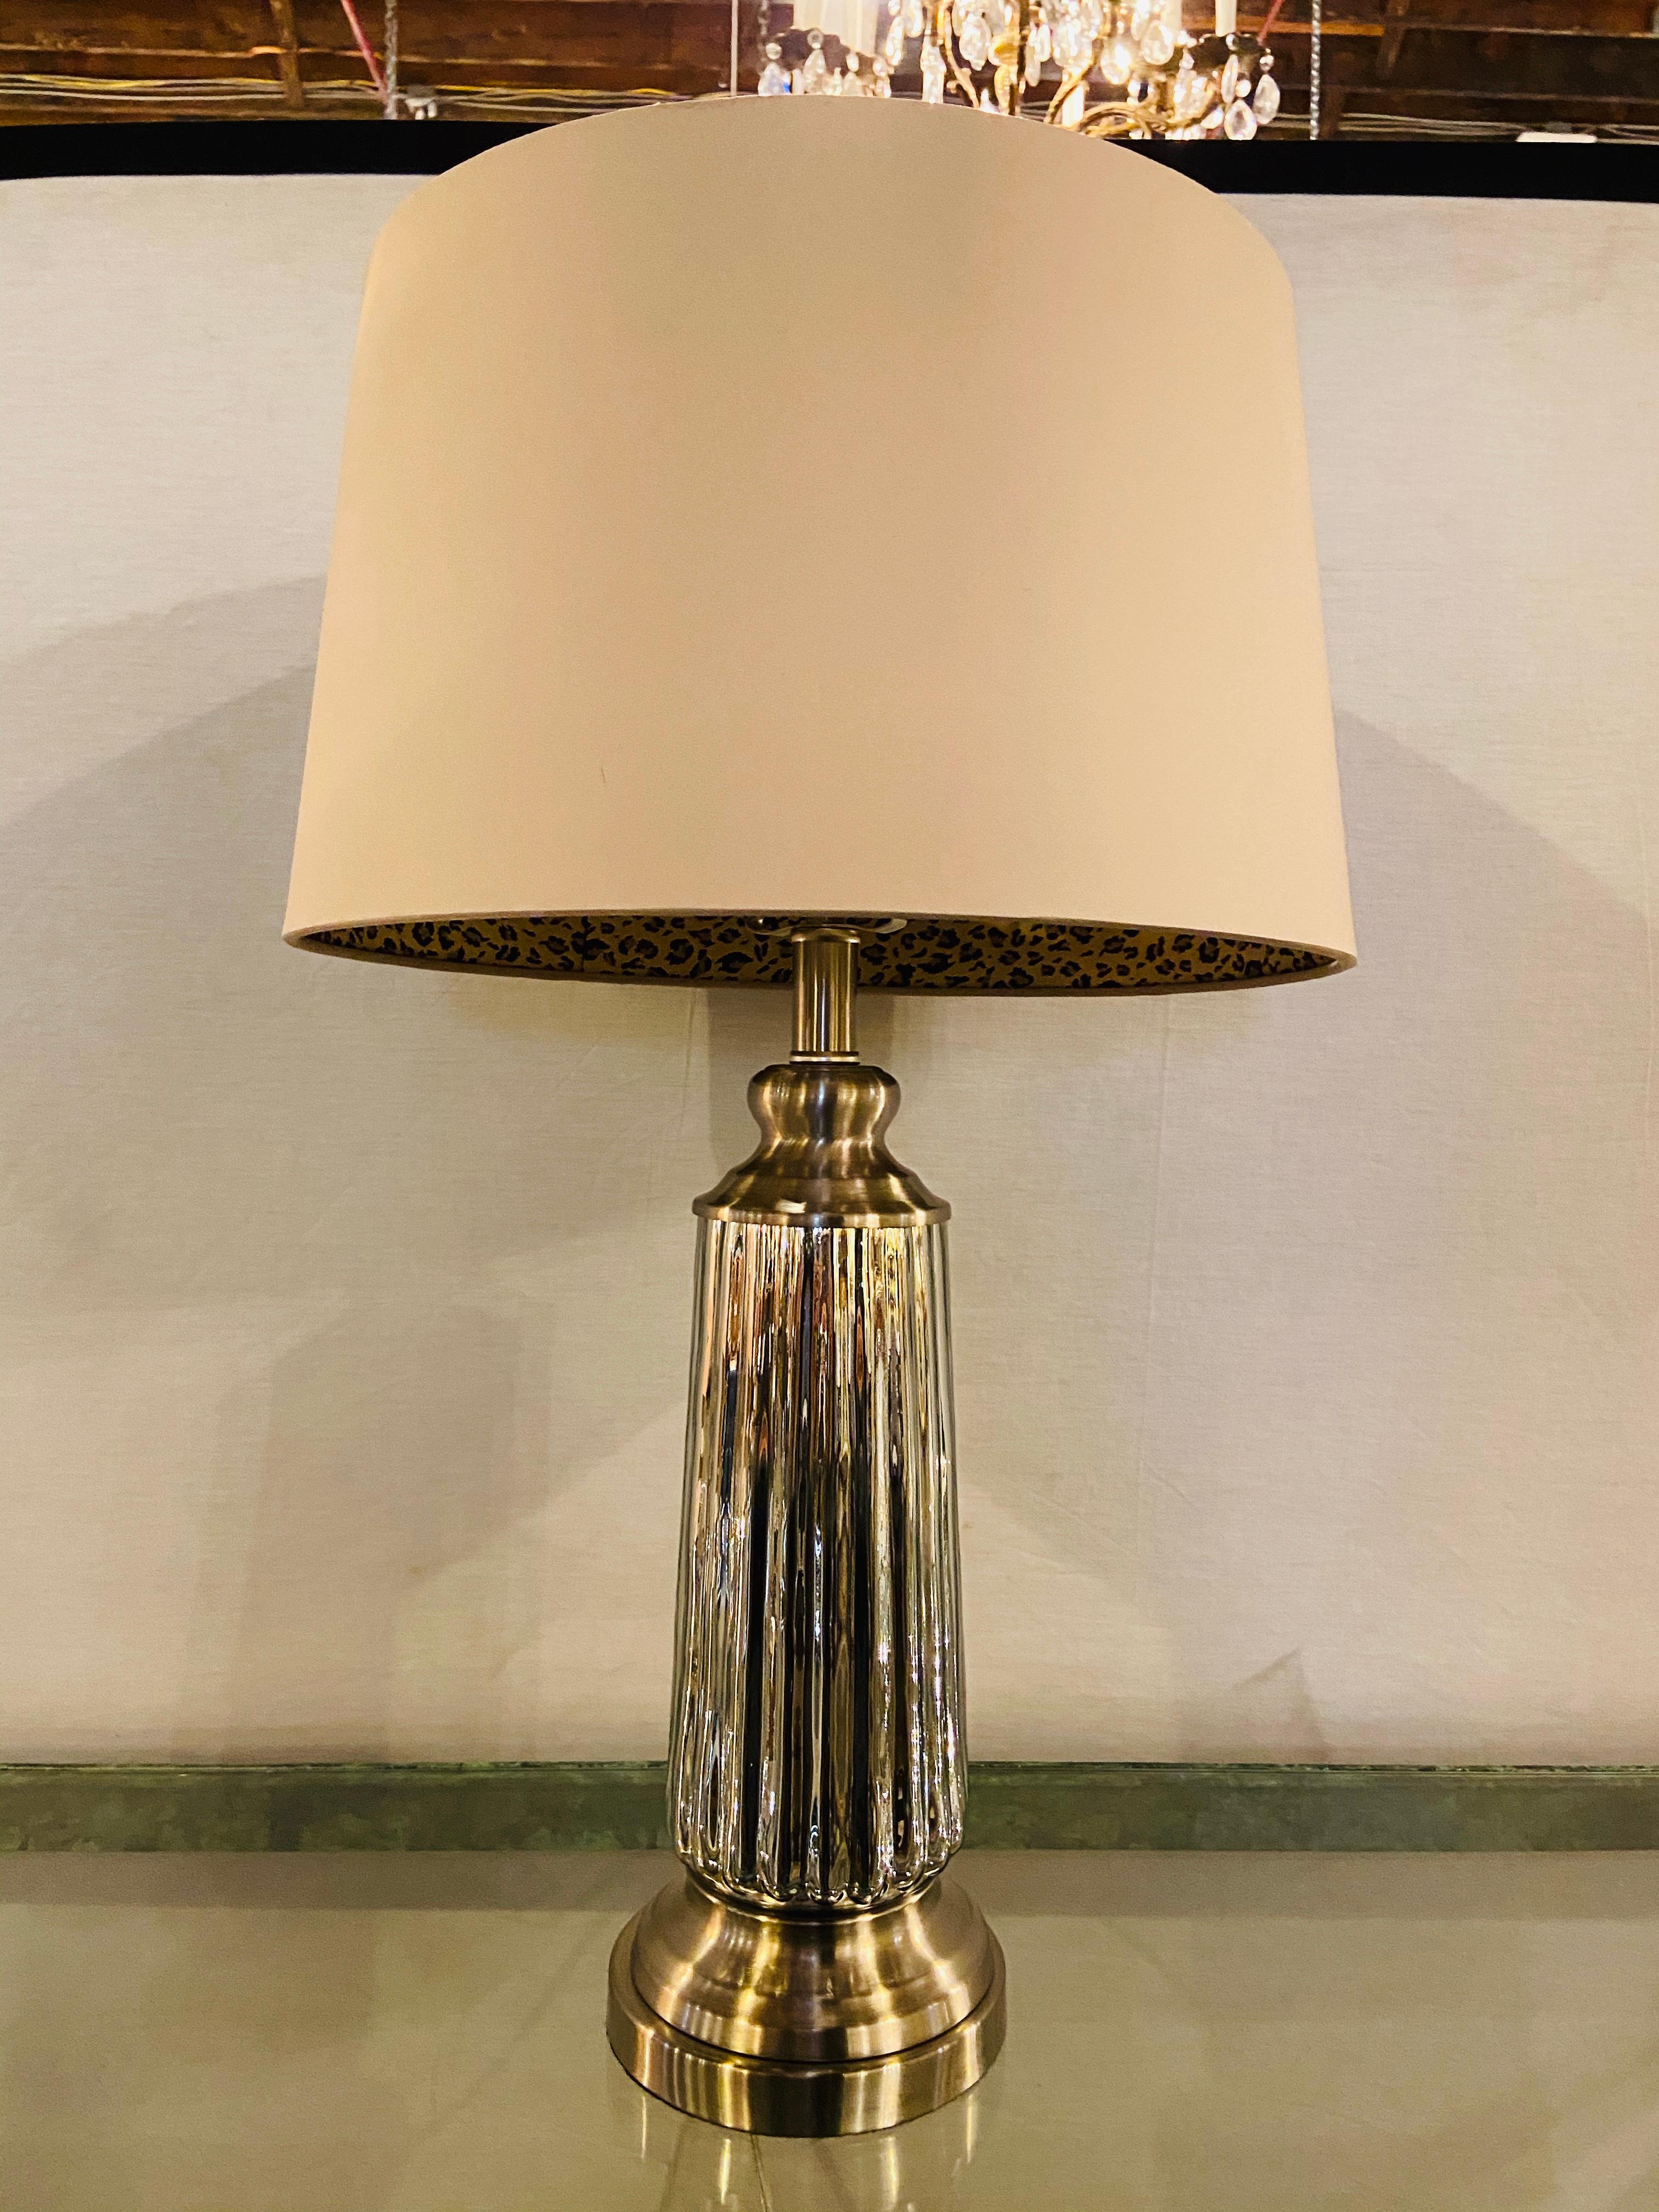 A Simple and chic Mid Century Modern style table lamp.  The silver tone lamp features a ribbed design and embellished with a custom shade having  leopard pattern interior.

Dimensions:
Lamp is 26